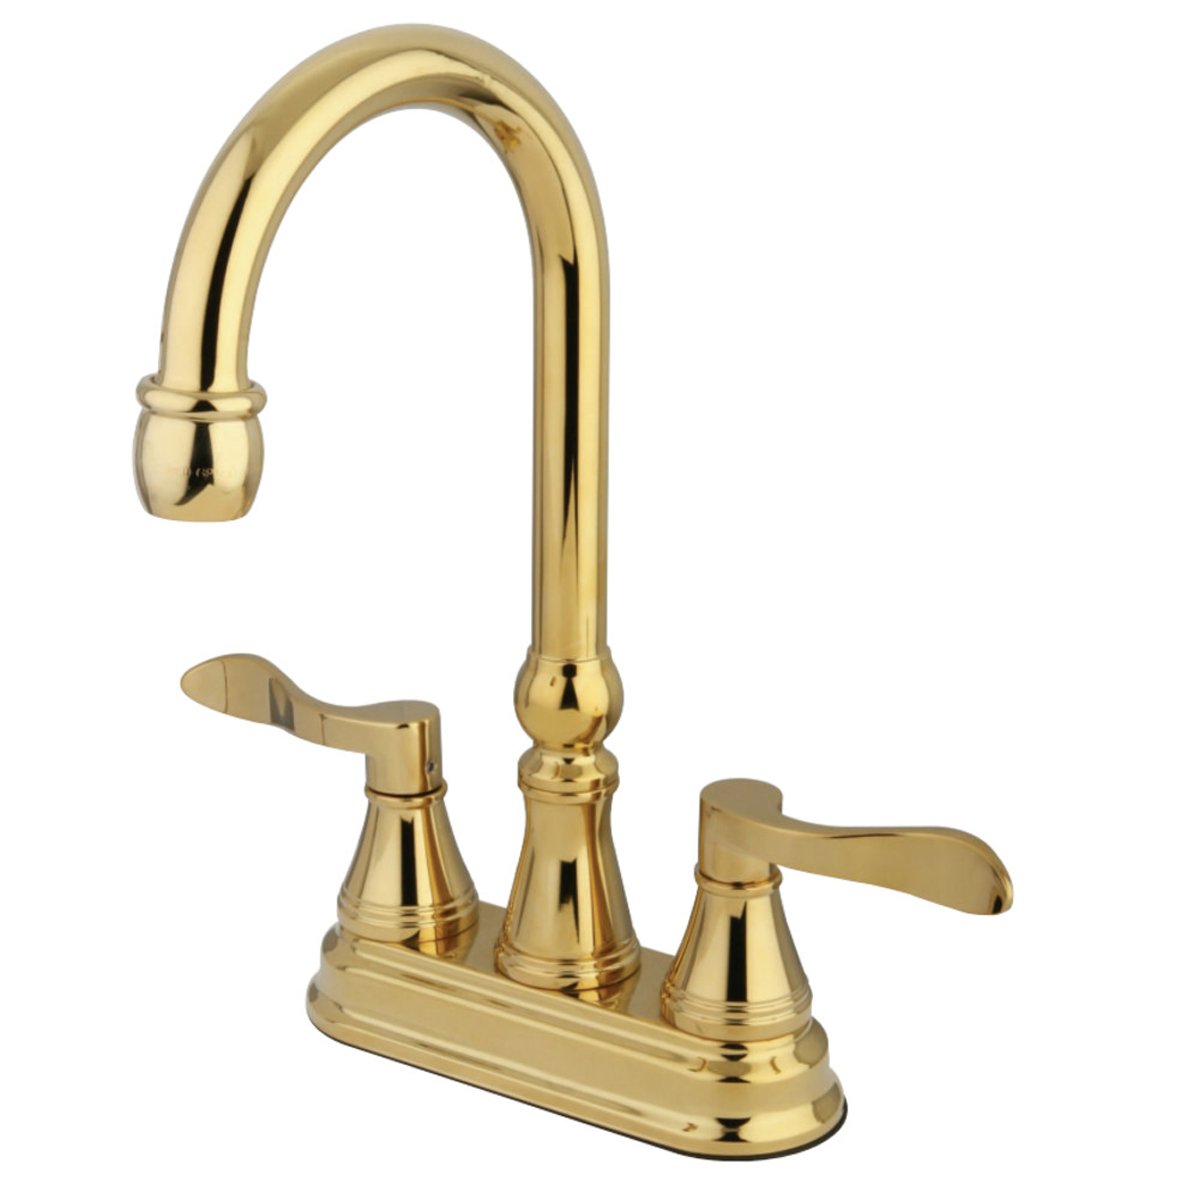 Kingston Brass NuFrench 4" Bar Faucet